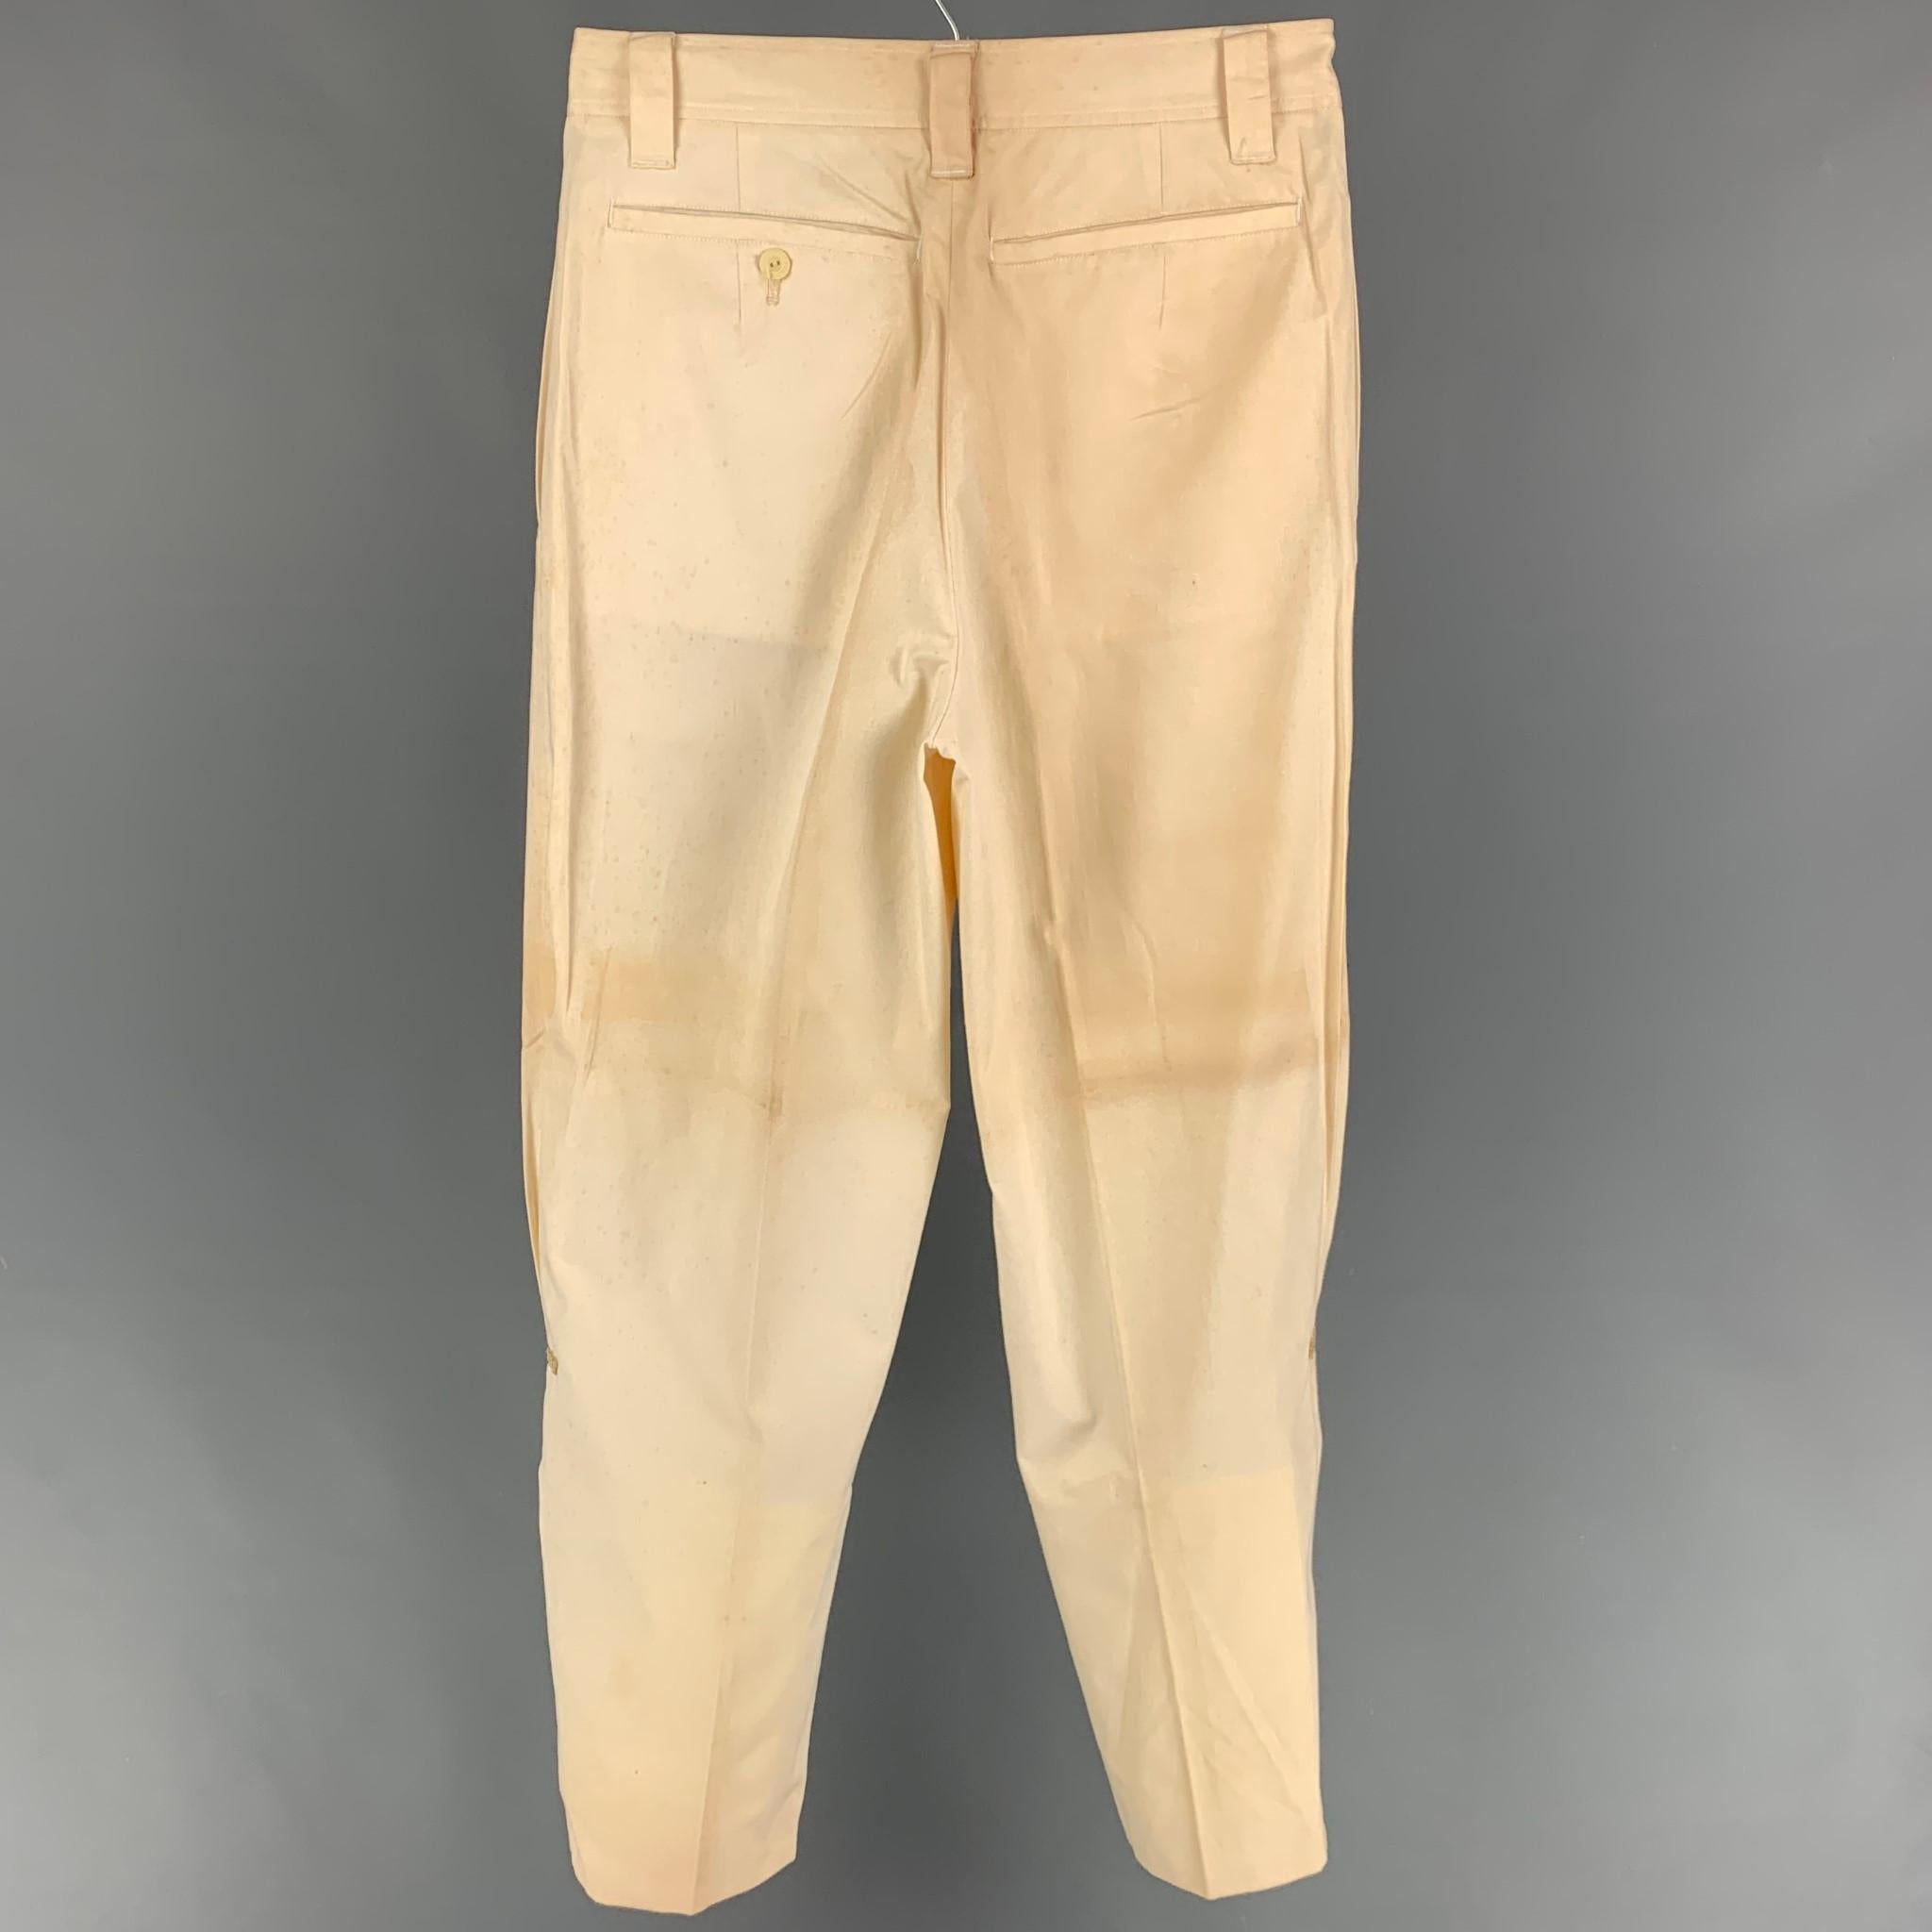 Vintage KANSAI MEN pants comes in a cream cotton with a gold glitter trim featuring a pleated style, high waisted, and a zip fly closure. Includes tags. Made in Japan. 

Very Good Pre-Owned Condition.
Marked: 30

Measurements:

Waist: 29 in.  